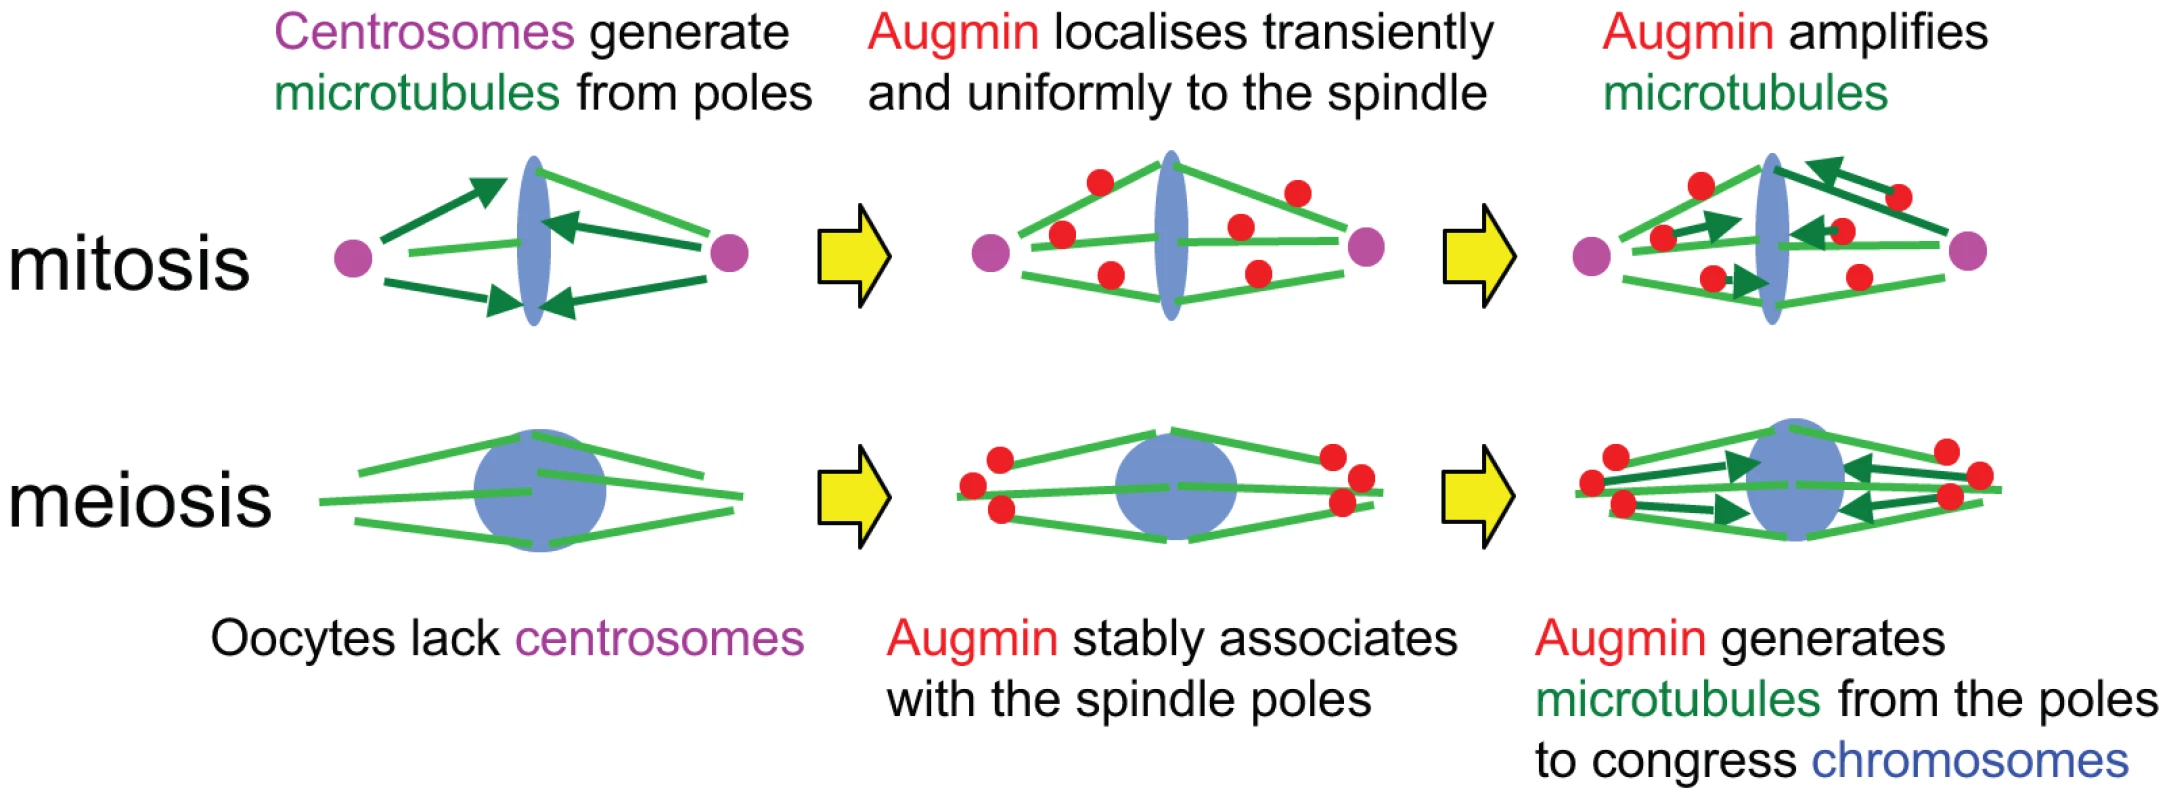 Stable association of Augmin with spindle poles compensate for the lack of centrosomes in oocytes.